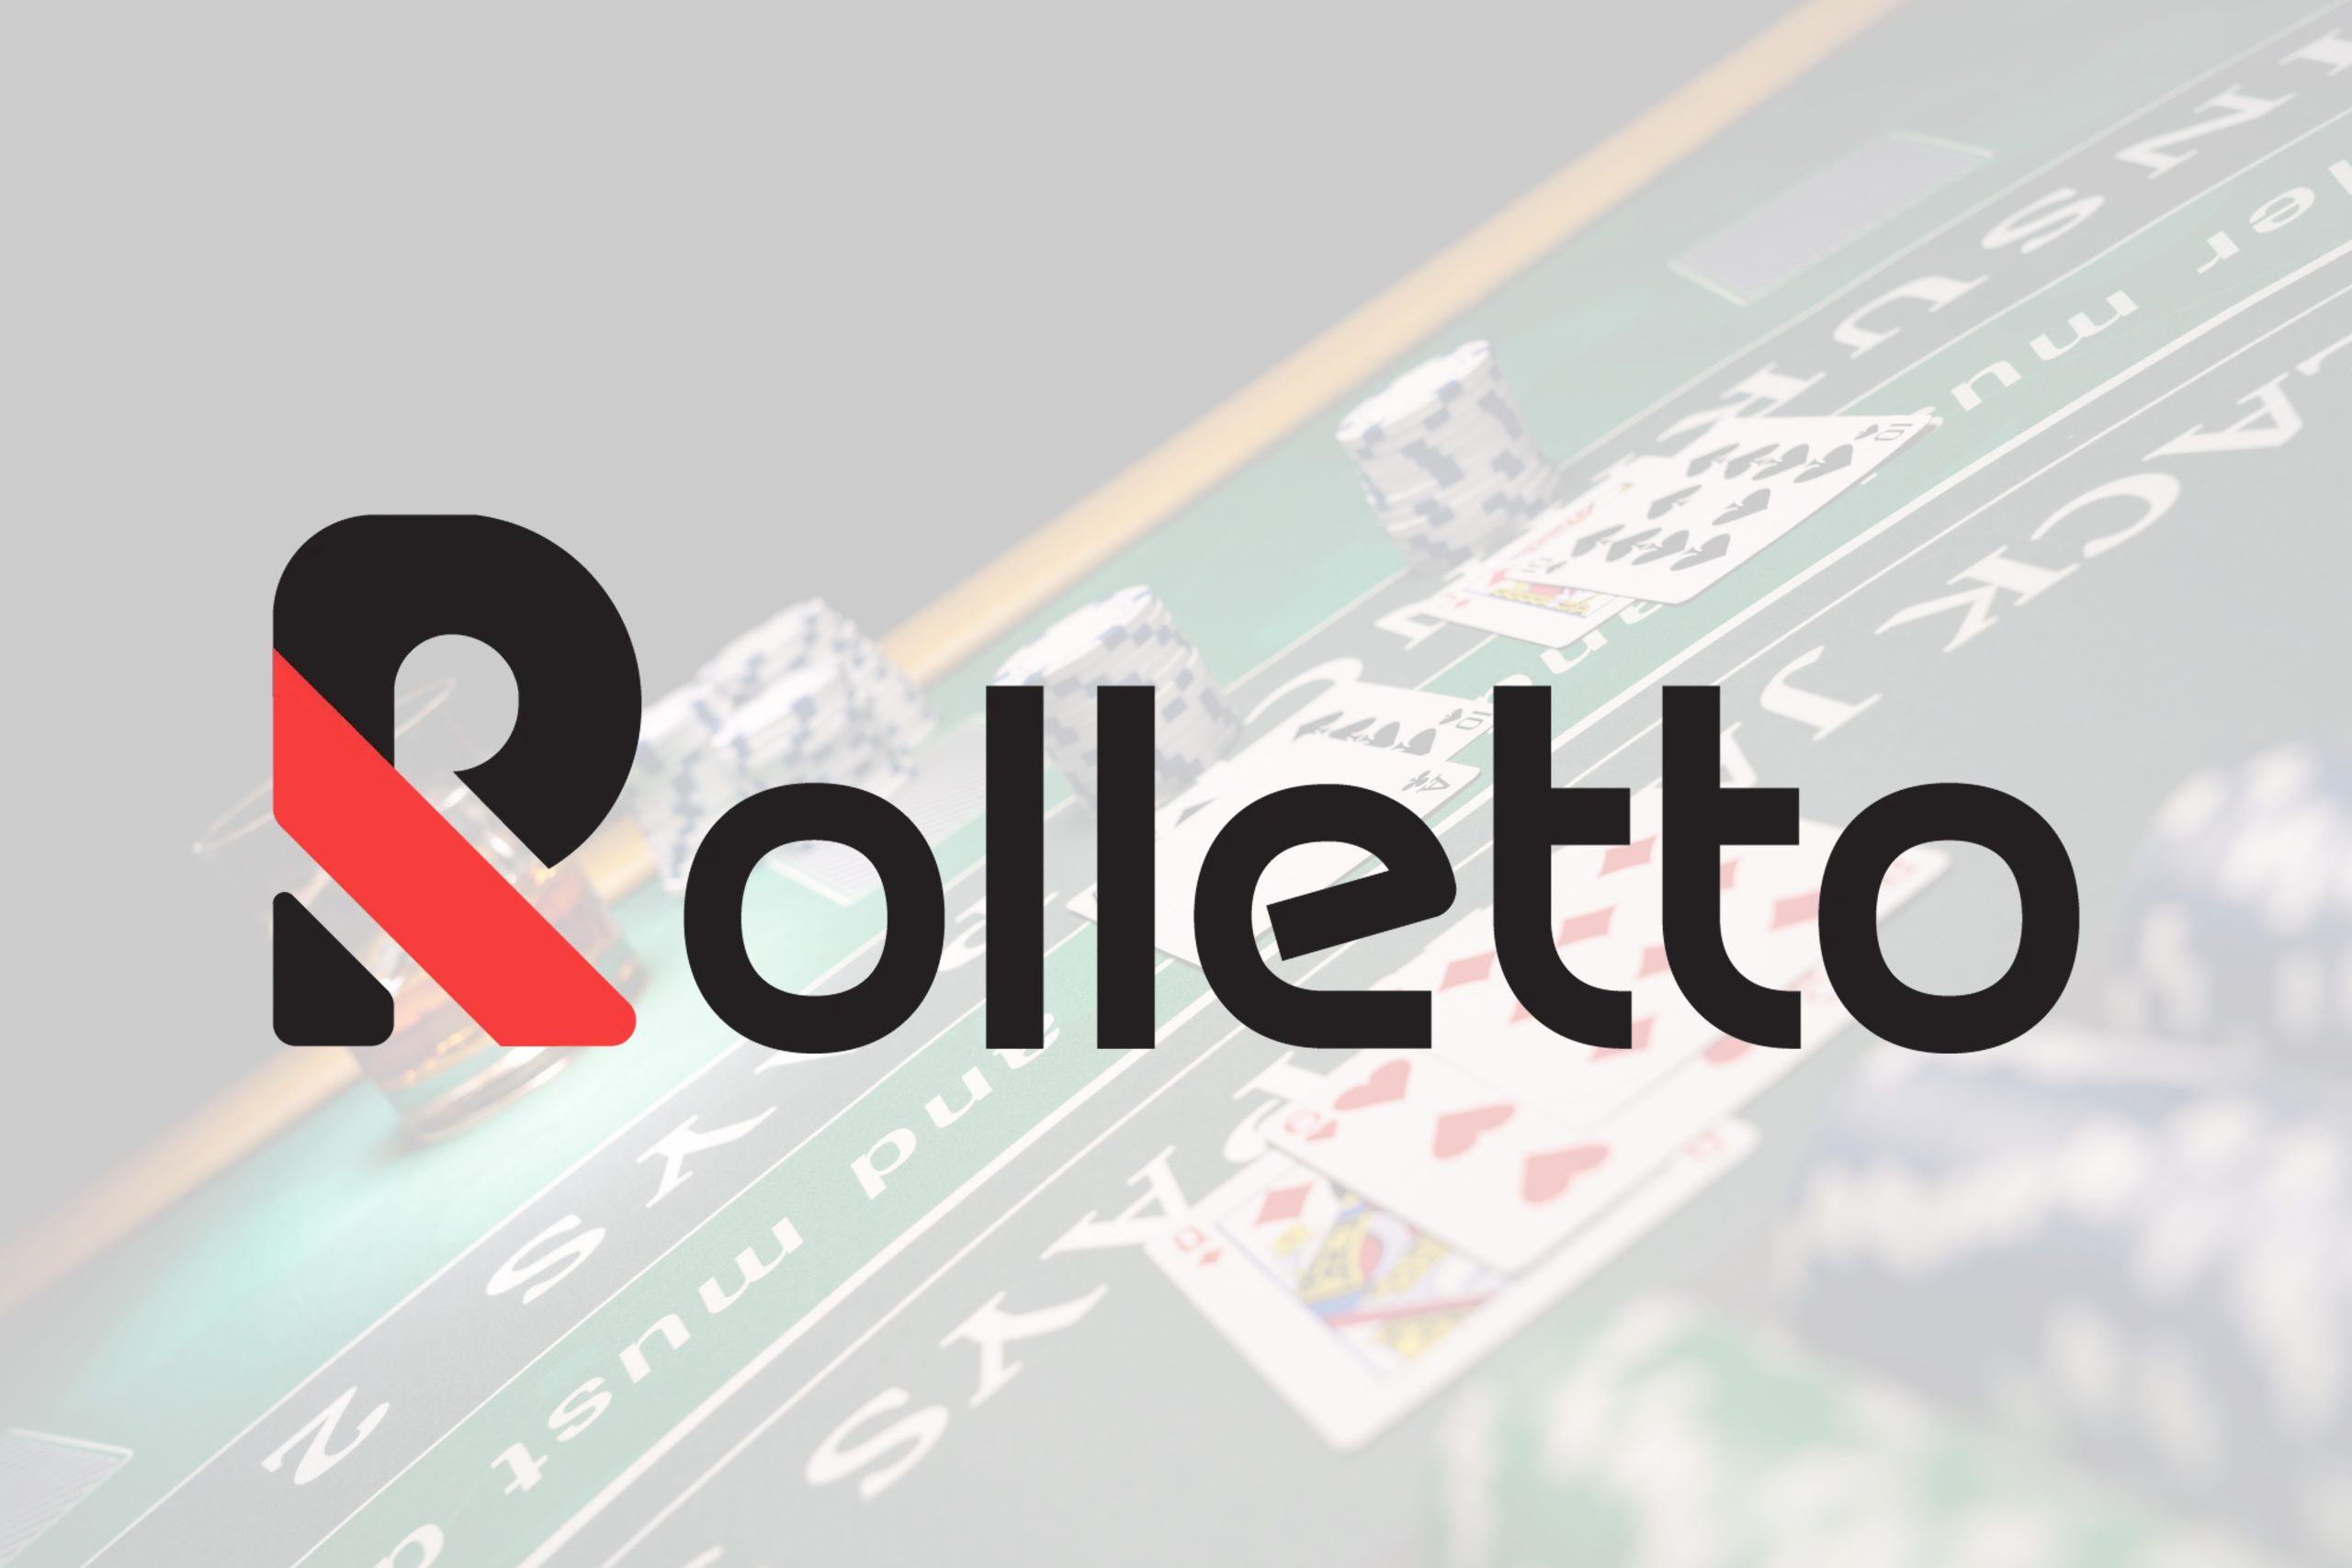 Rolletto Not on Gamstop